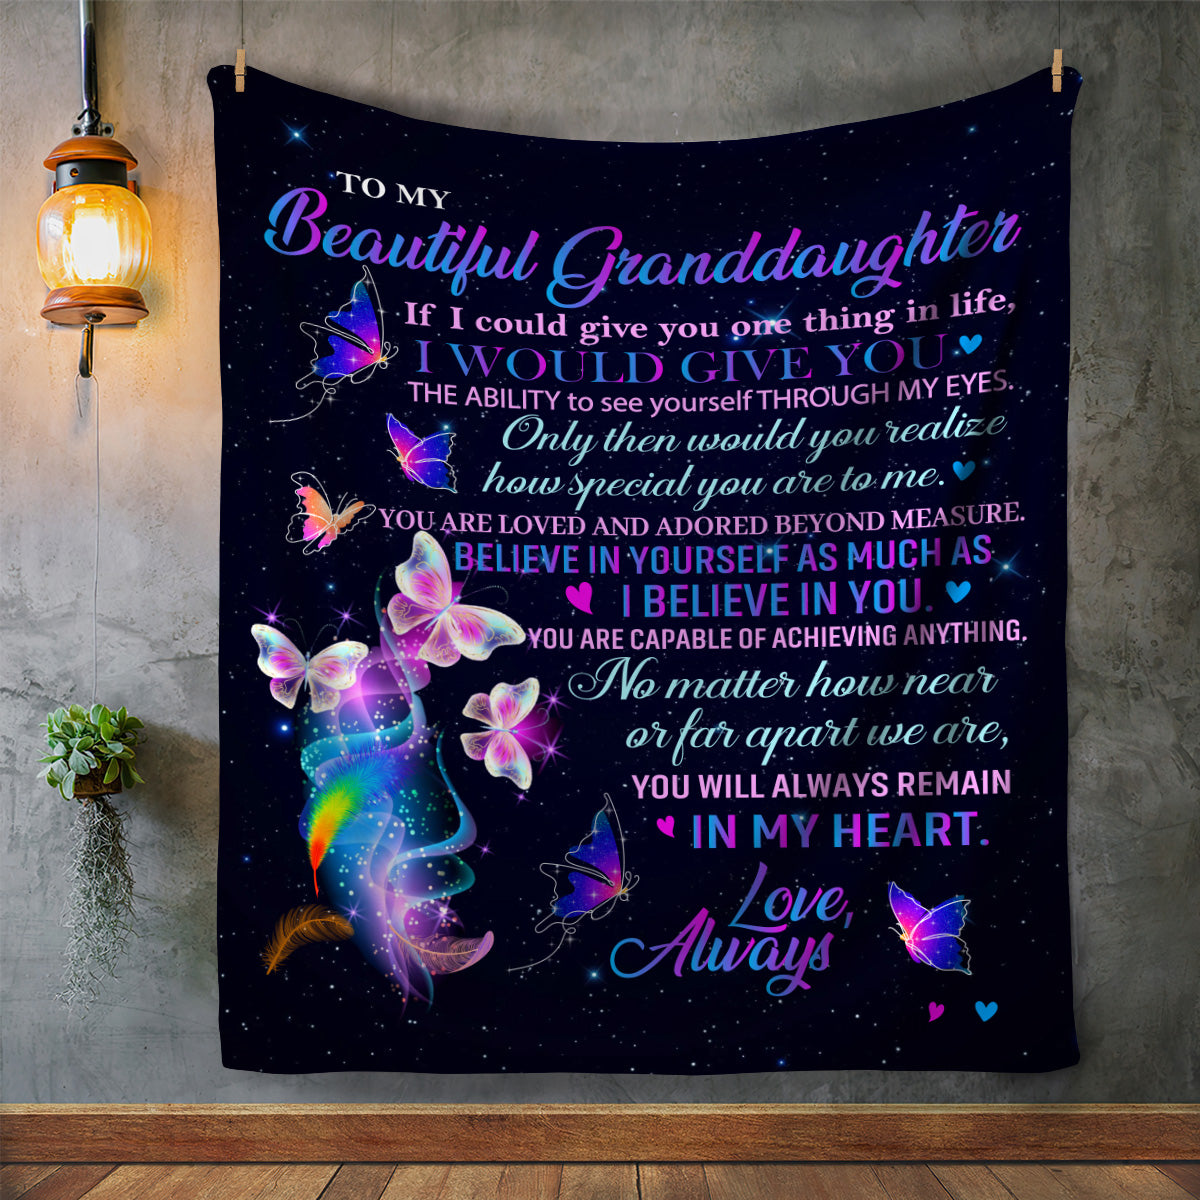 To My Beautiful Granddaughter -You Are Loved And Adored - Cozy Plush Blanket Gift